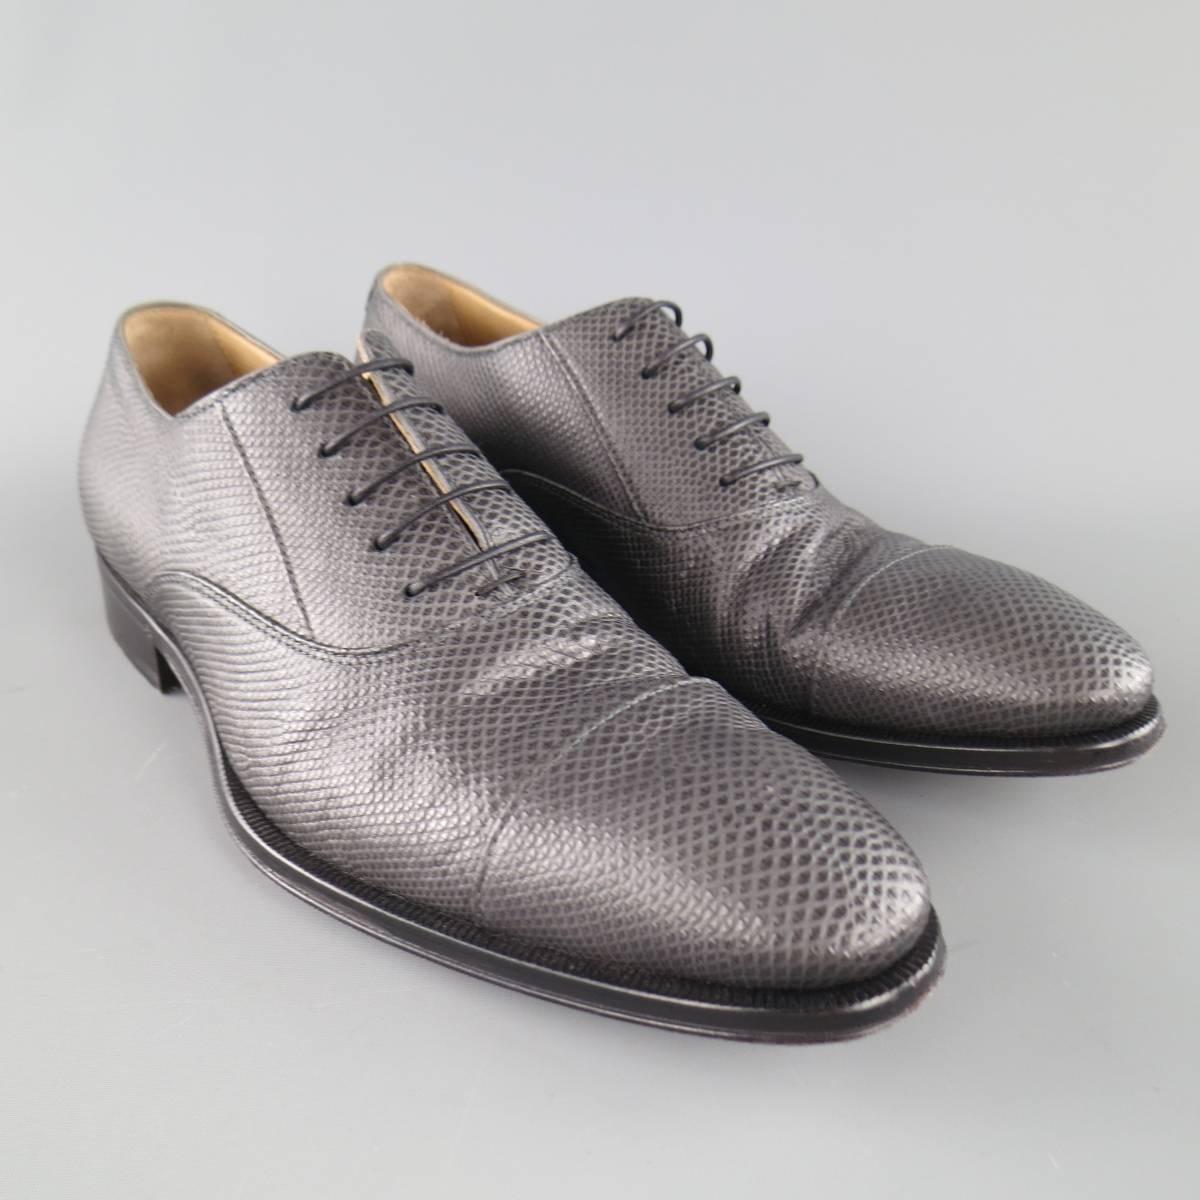 GIORGIO ARMANI dress shoes come in a dark gray karung textured leather an d feature a pointed cap toe and black sole. With box. Made in Italy.
 
Excellent Pre-Owned Condition.
Marked: 42.5


Web ID: 82182 
